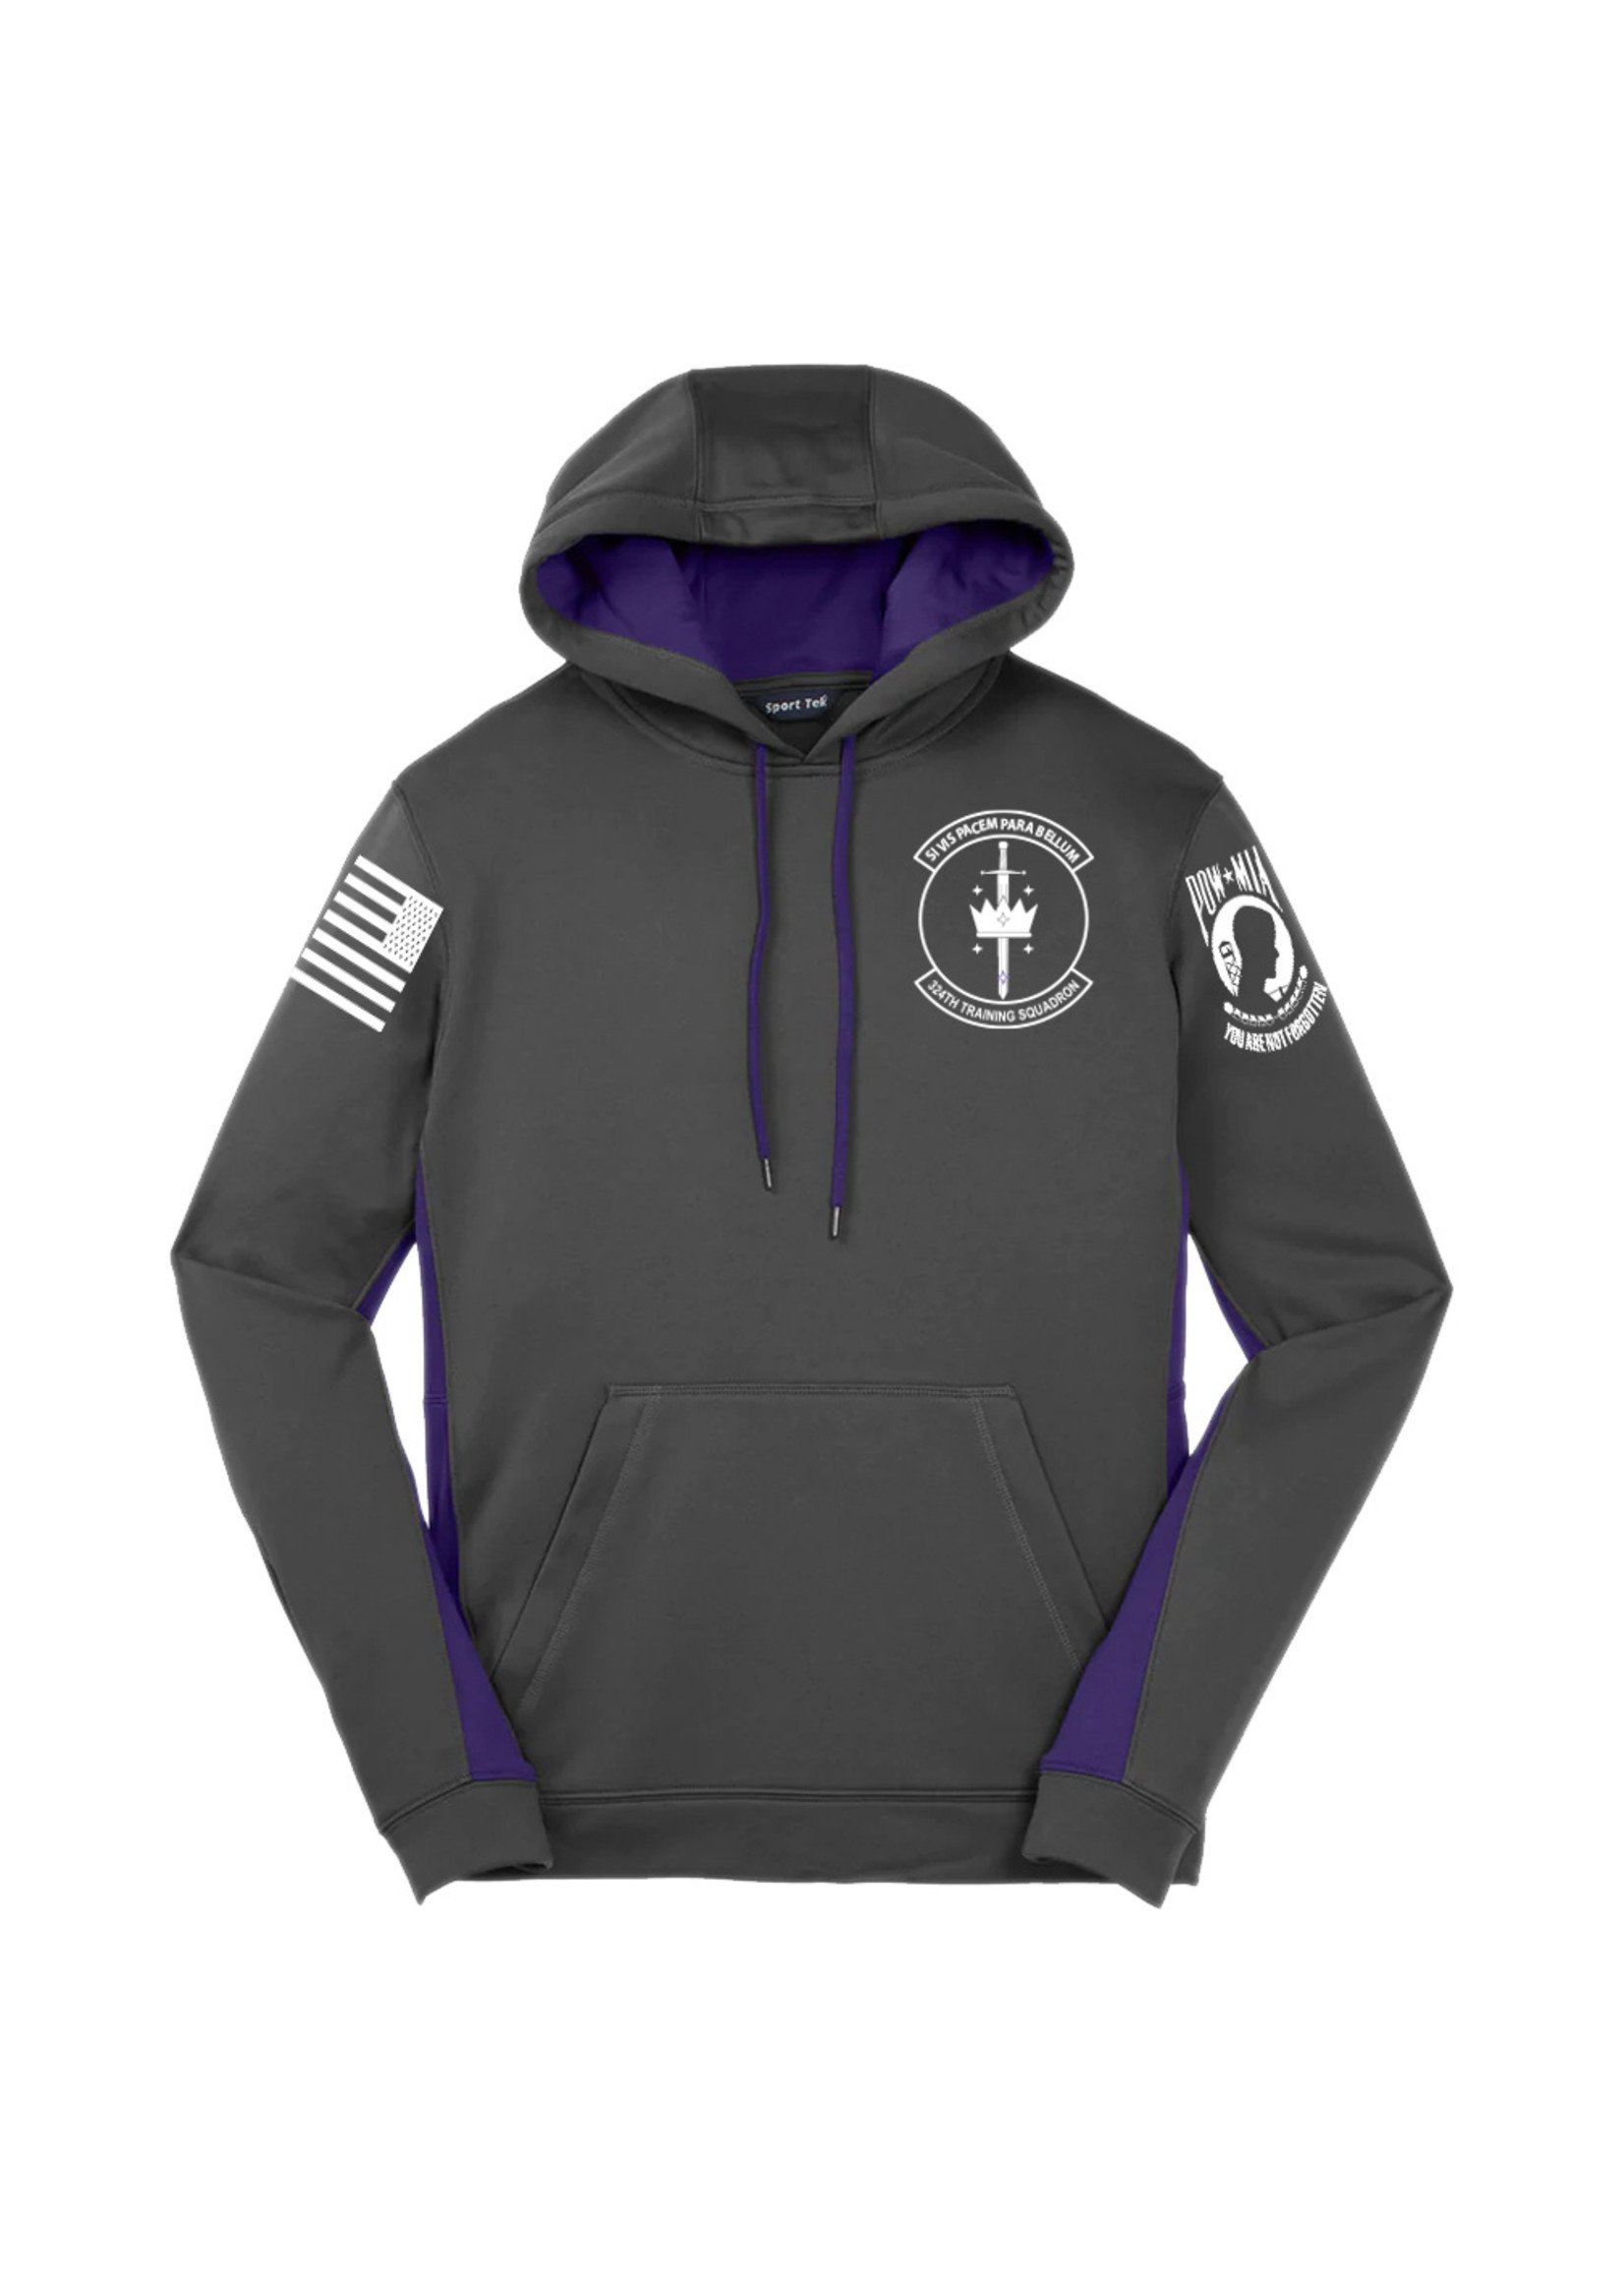 324th Knights Wicking Hoodie